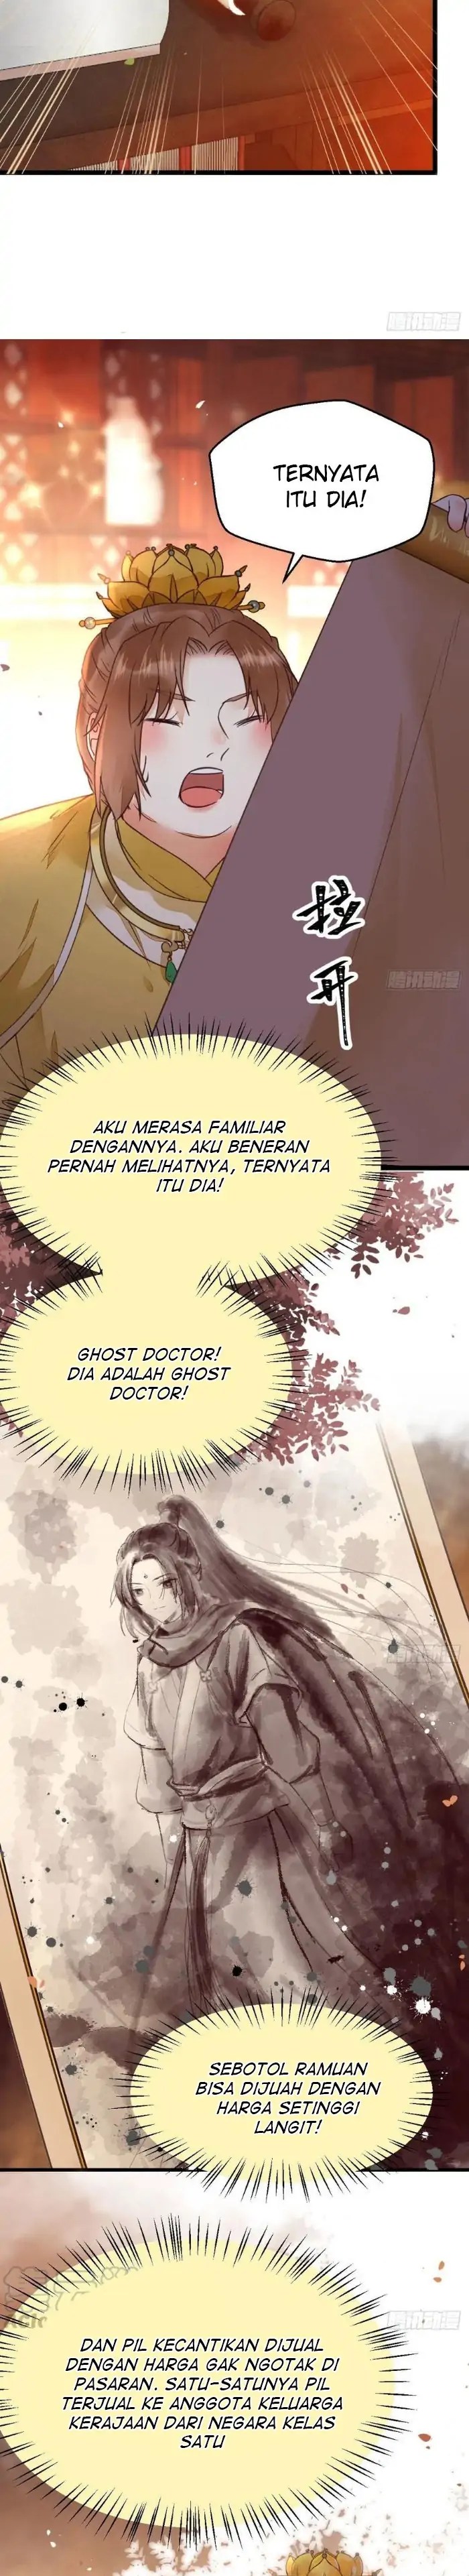 The Ghostly Doctor Chapter 352 12